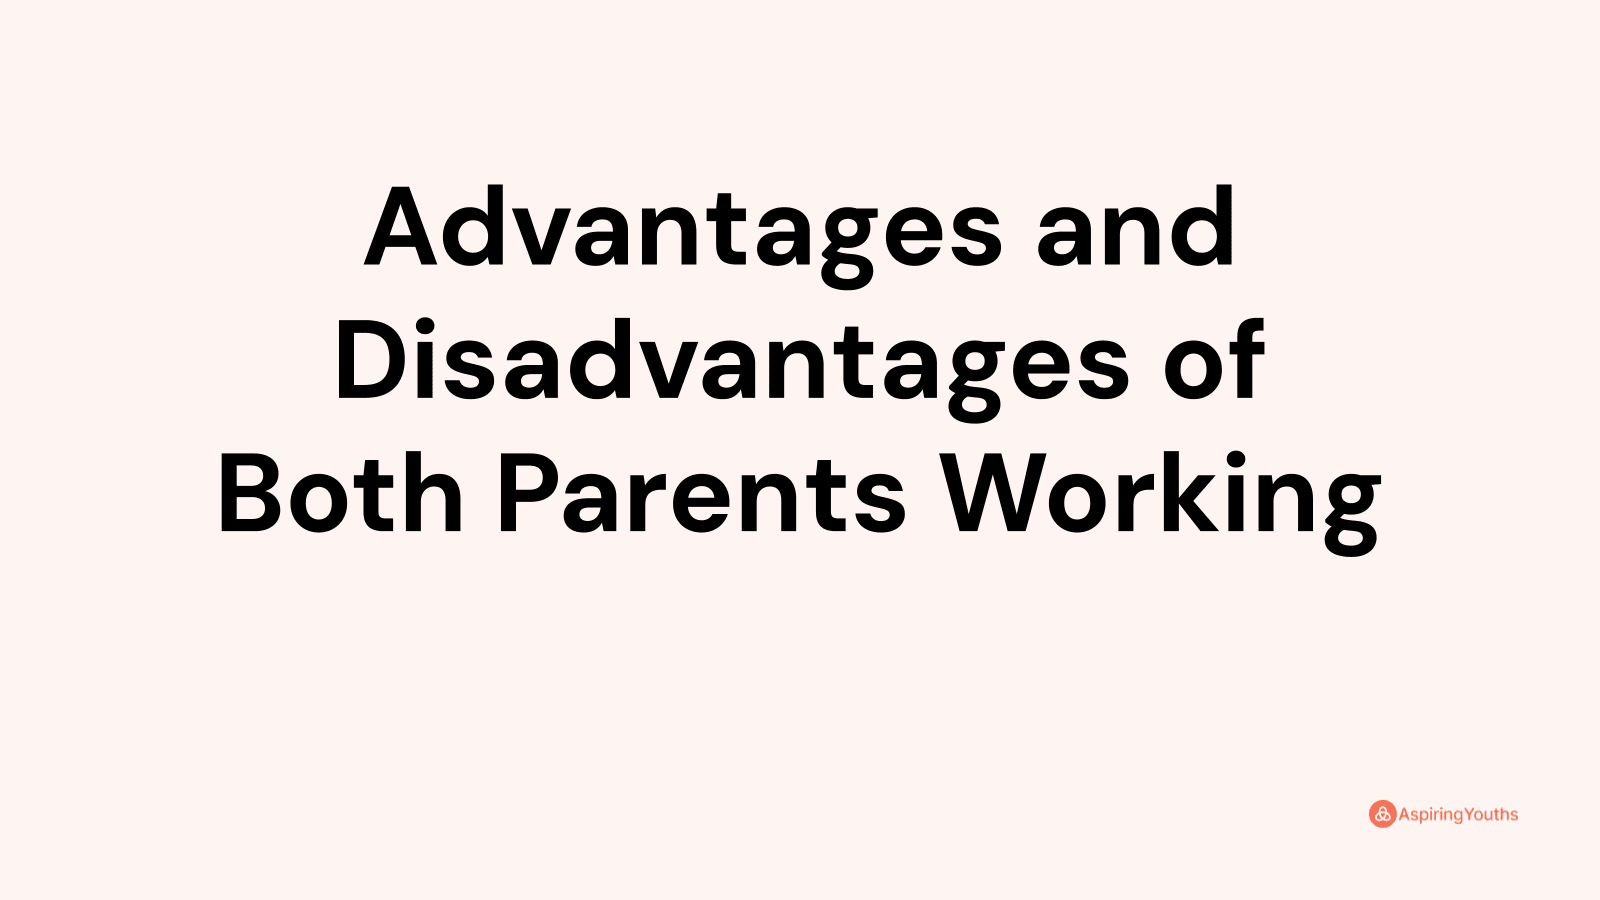 Advantages and Disadvantages of Both Parents Working